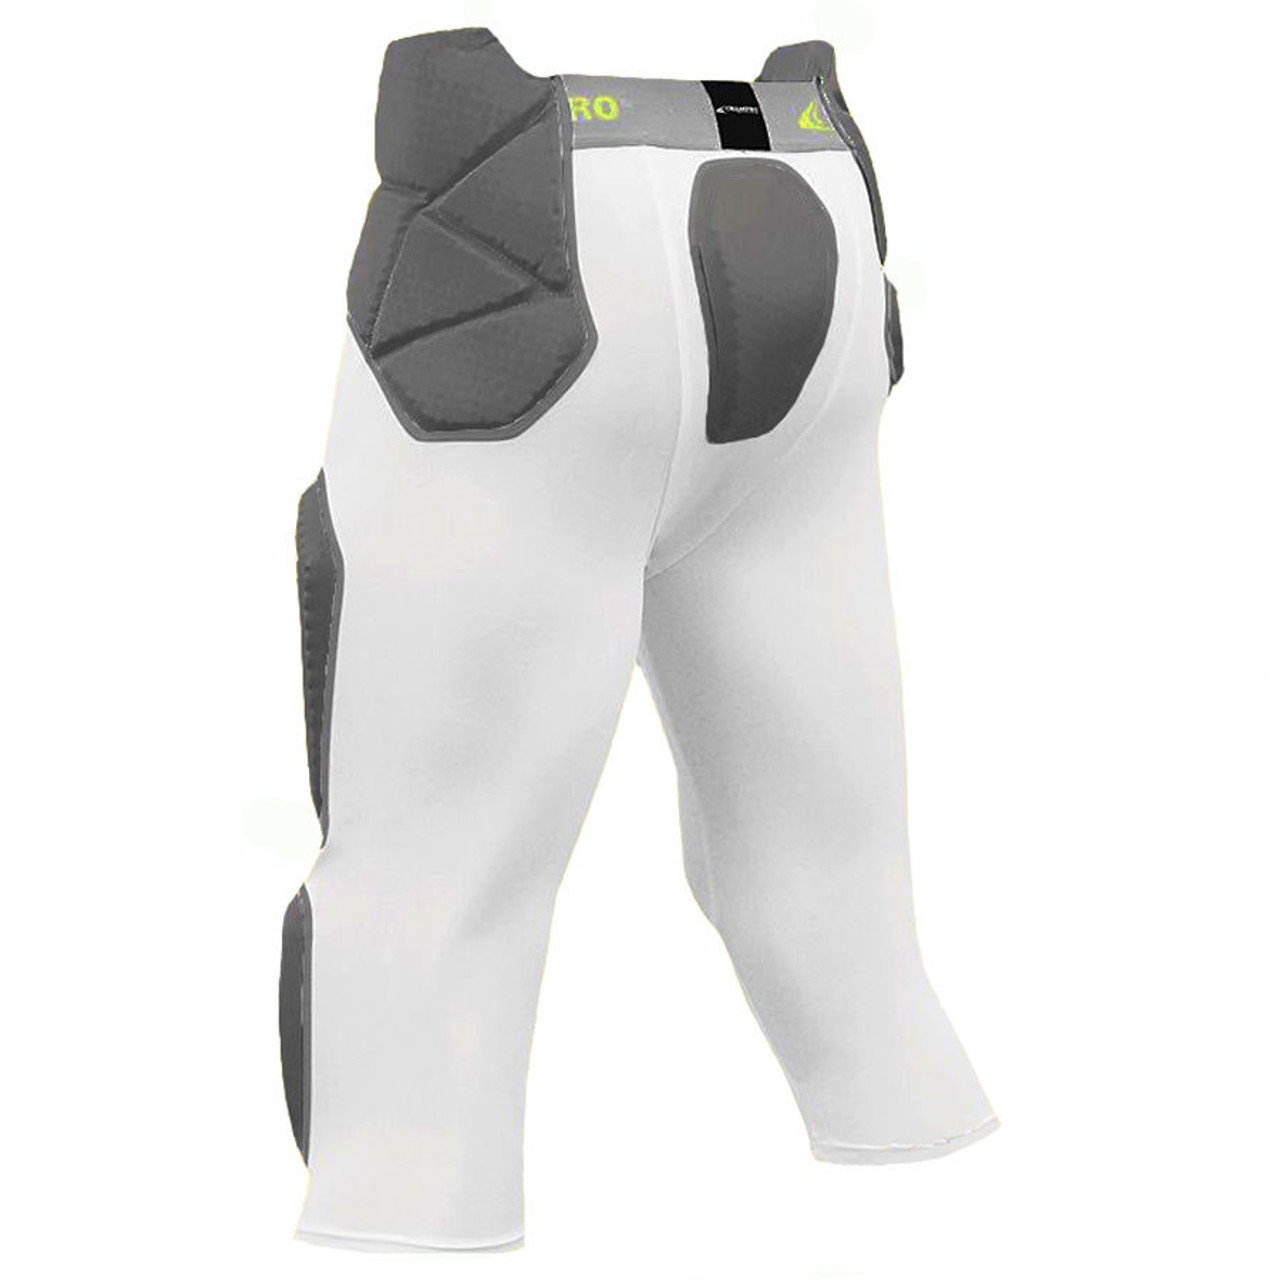 Adult Youth Girdle Baseball Sliding Short with Cup